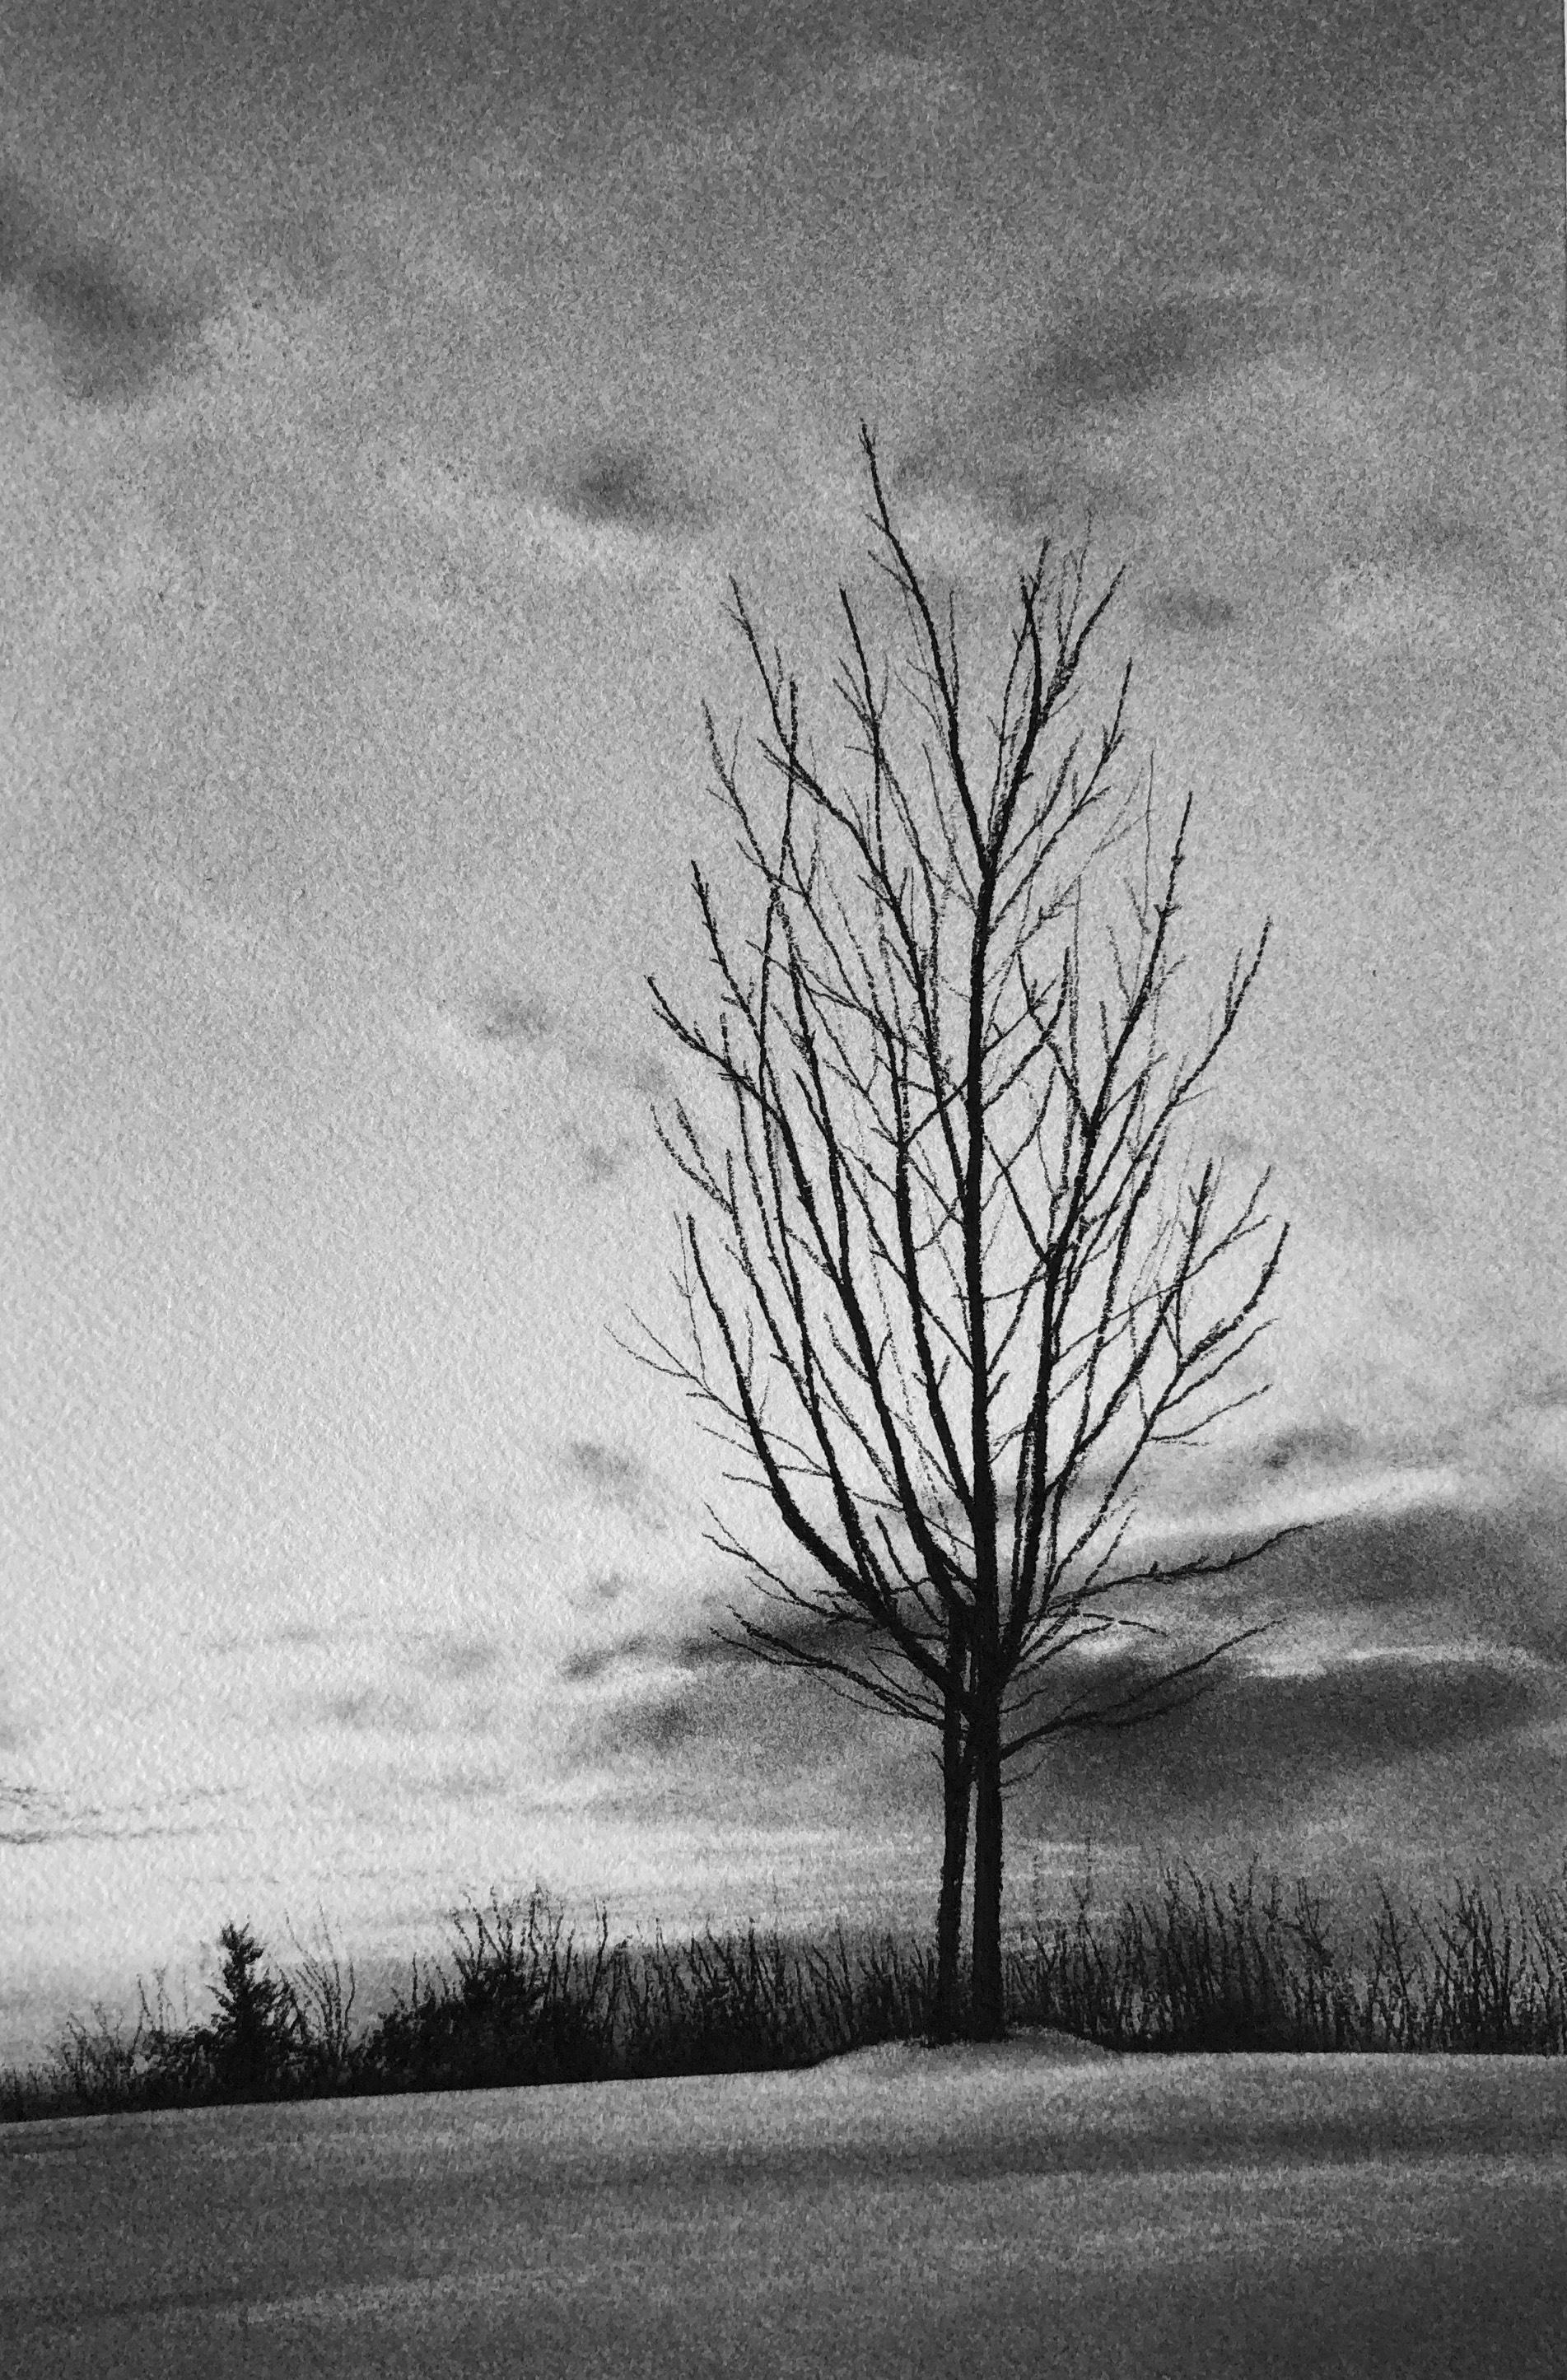 Katherine Curci Figurative Art - Winter Scene on Chesswood Trail, black and white charcoal drawing of bare tree